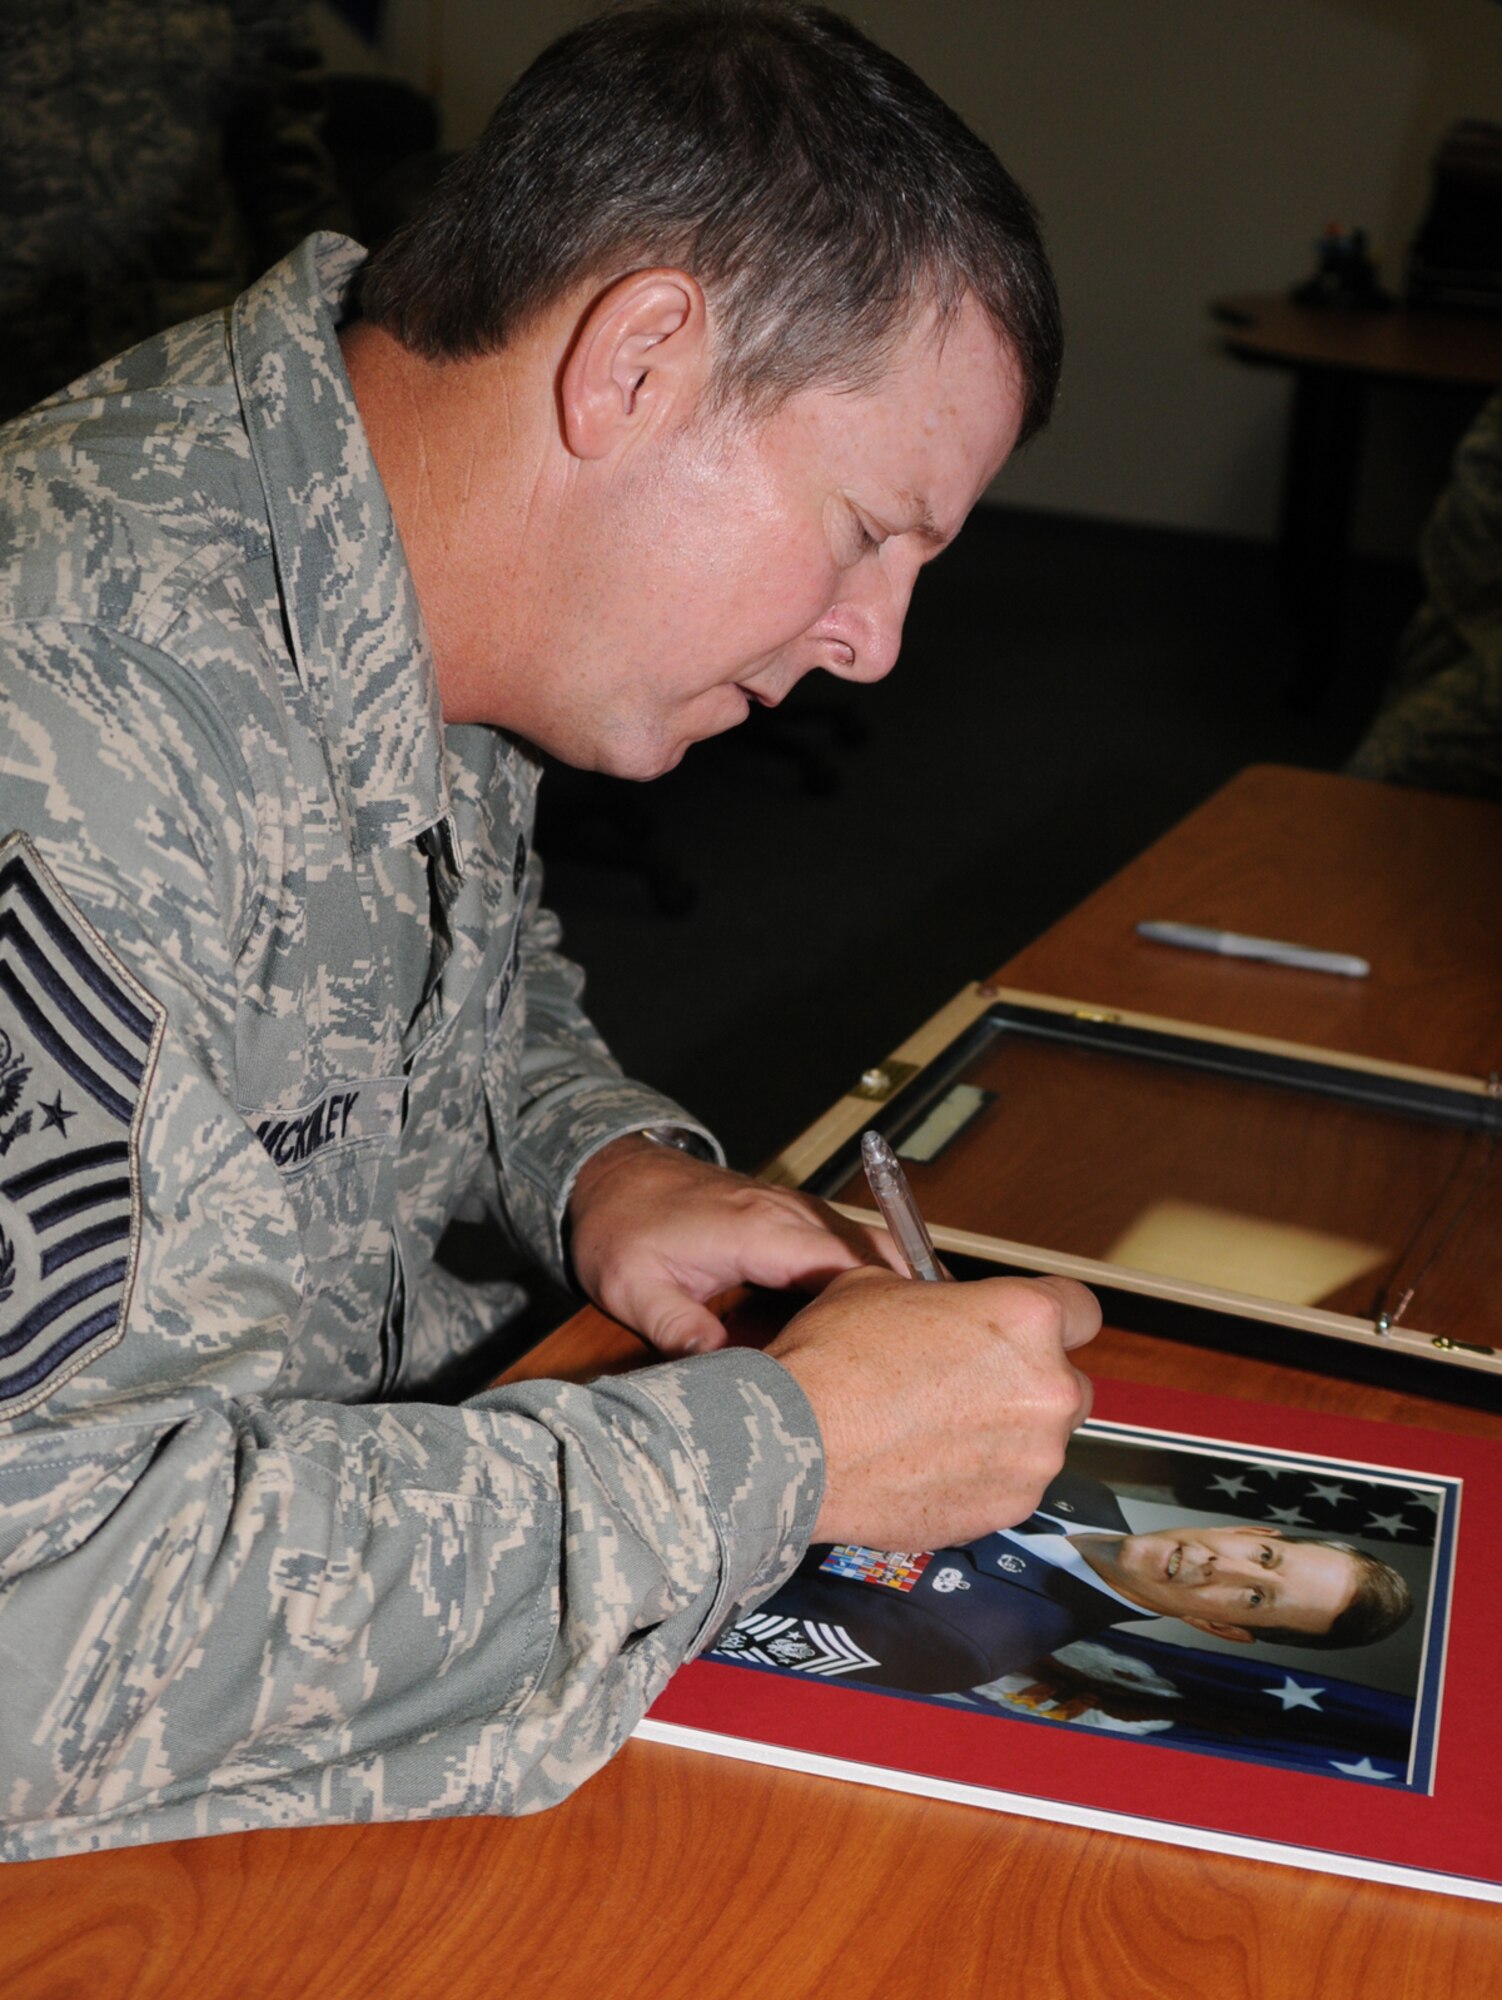 Chief McKinley signs his photograph to be displayed at Airman Leadership School along with pictures of the other 14 chiefs to hold the Air Force’s top enlisted position.  (U.S. Air Force photo by Kemberly Groue)